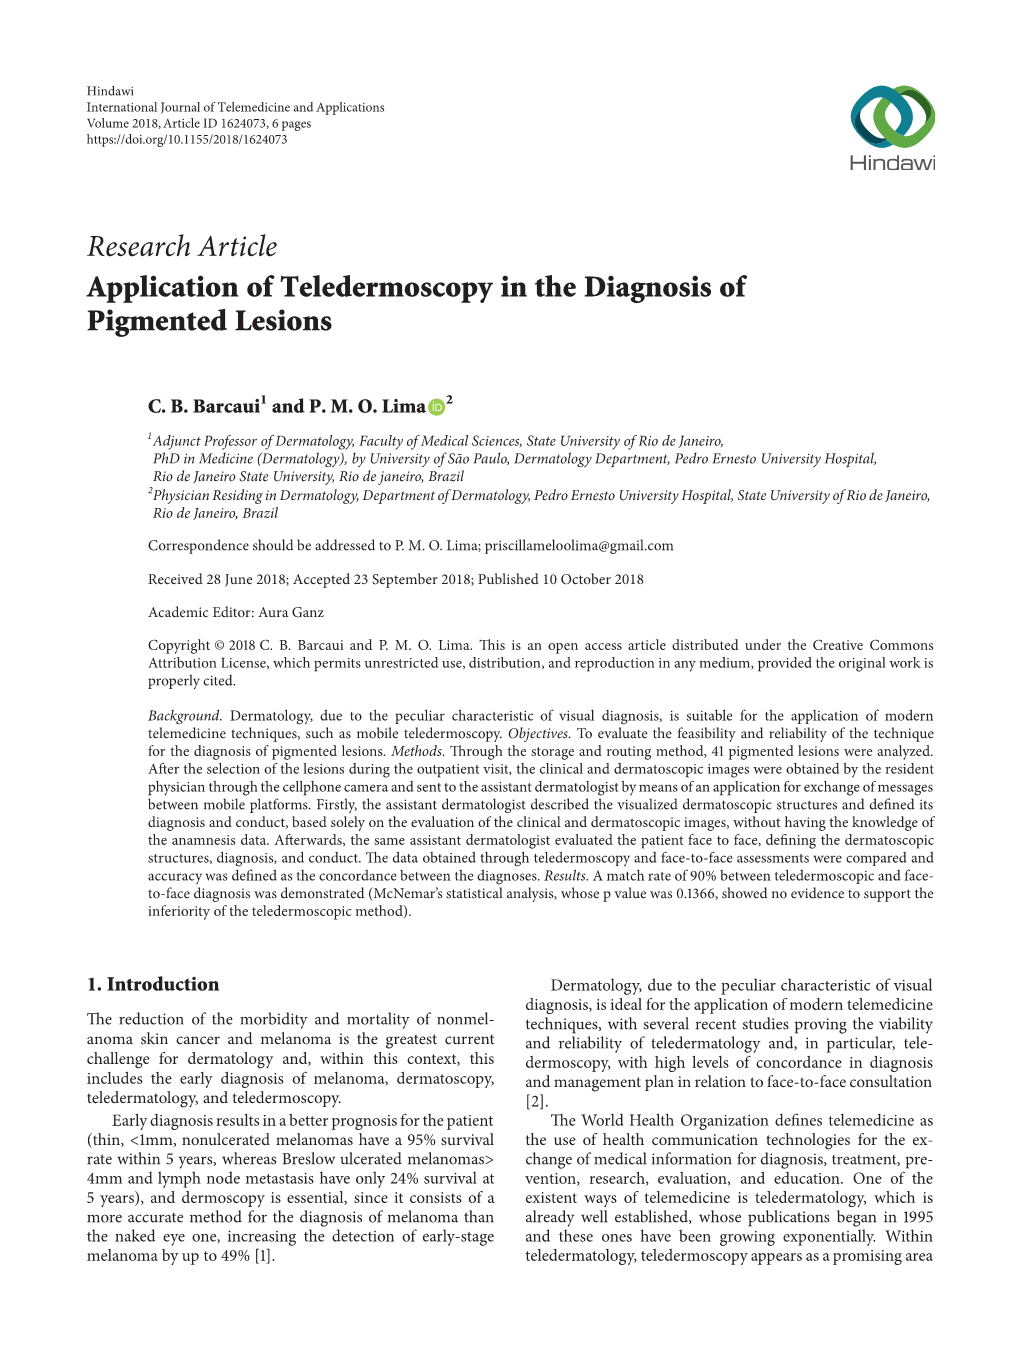 Application of Teledermoscopy in the Diagnosis of Pigmented Lesions